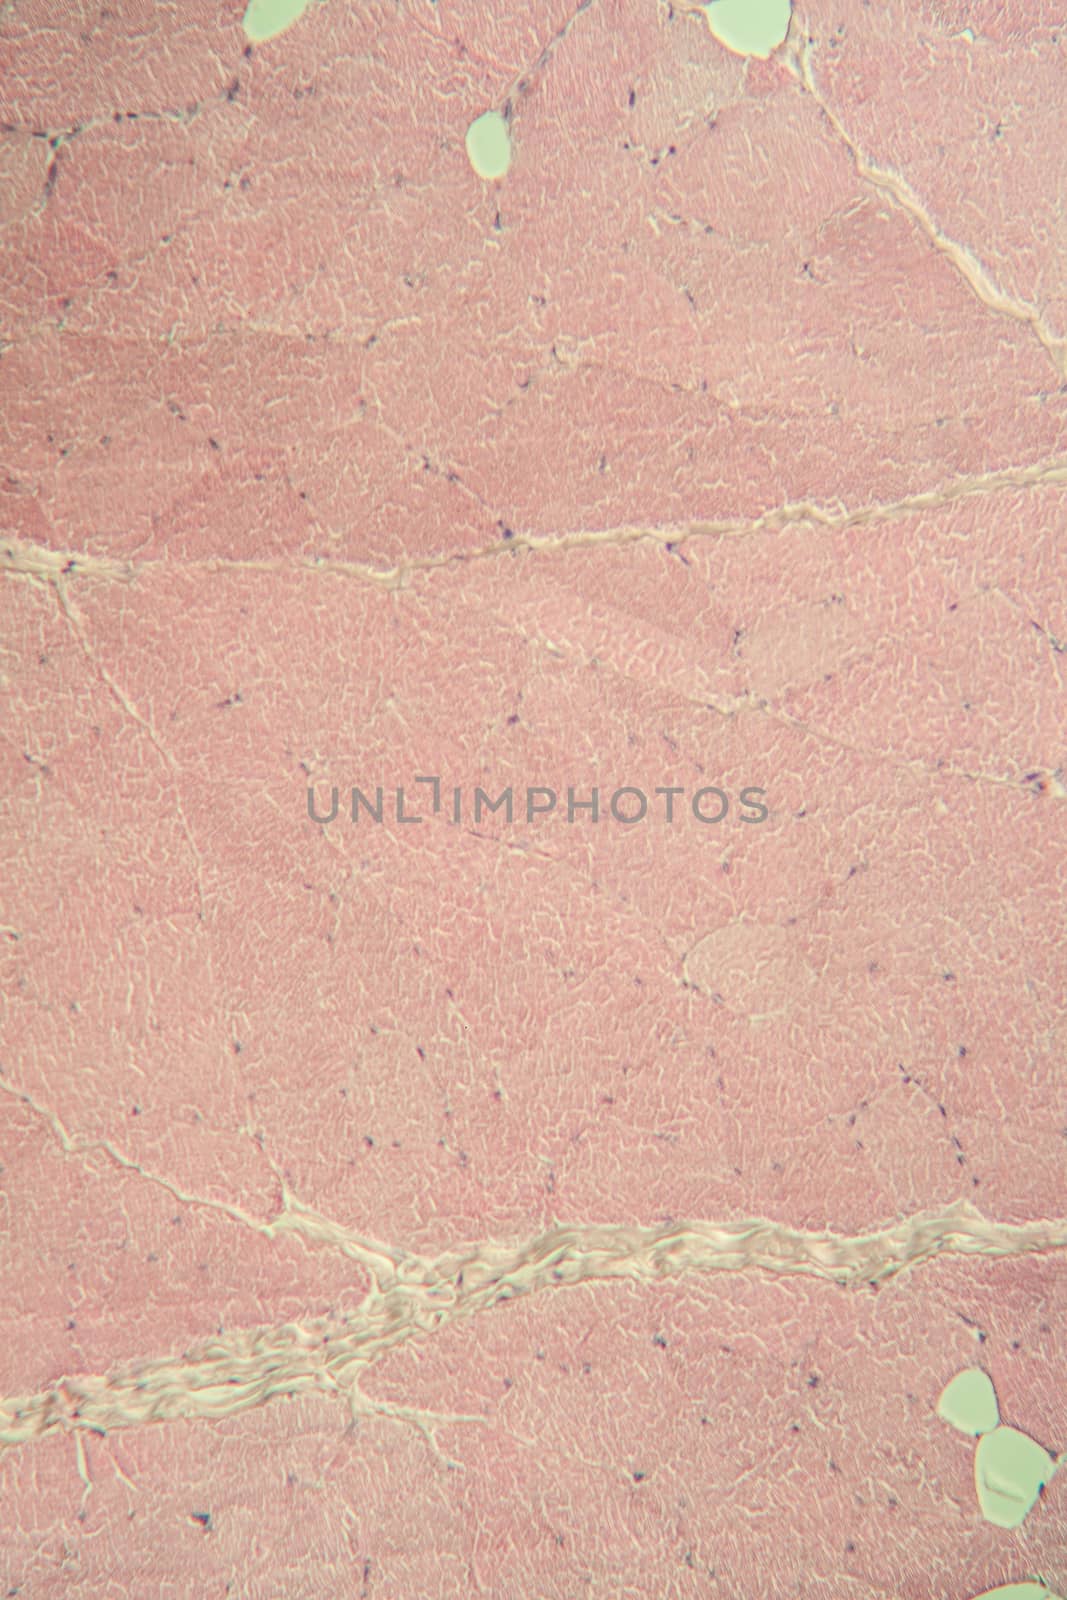 Skin under the microscope 100x by Dr-Lange